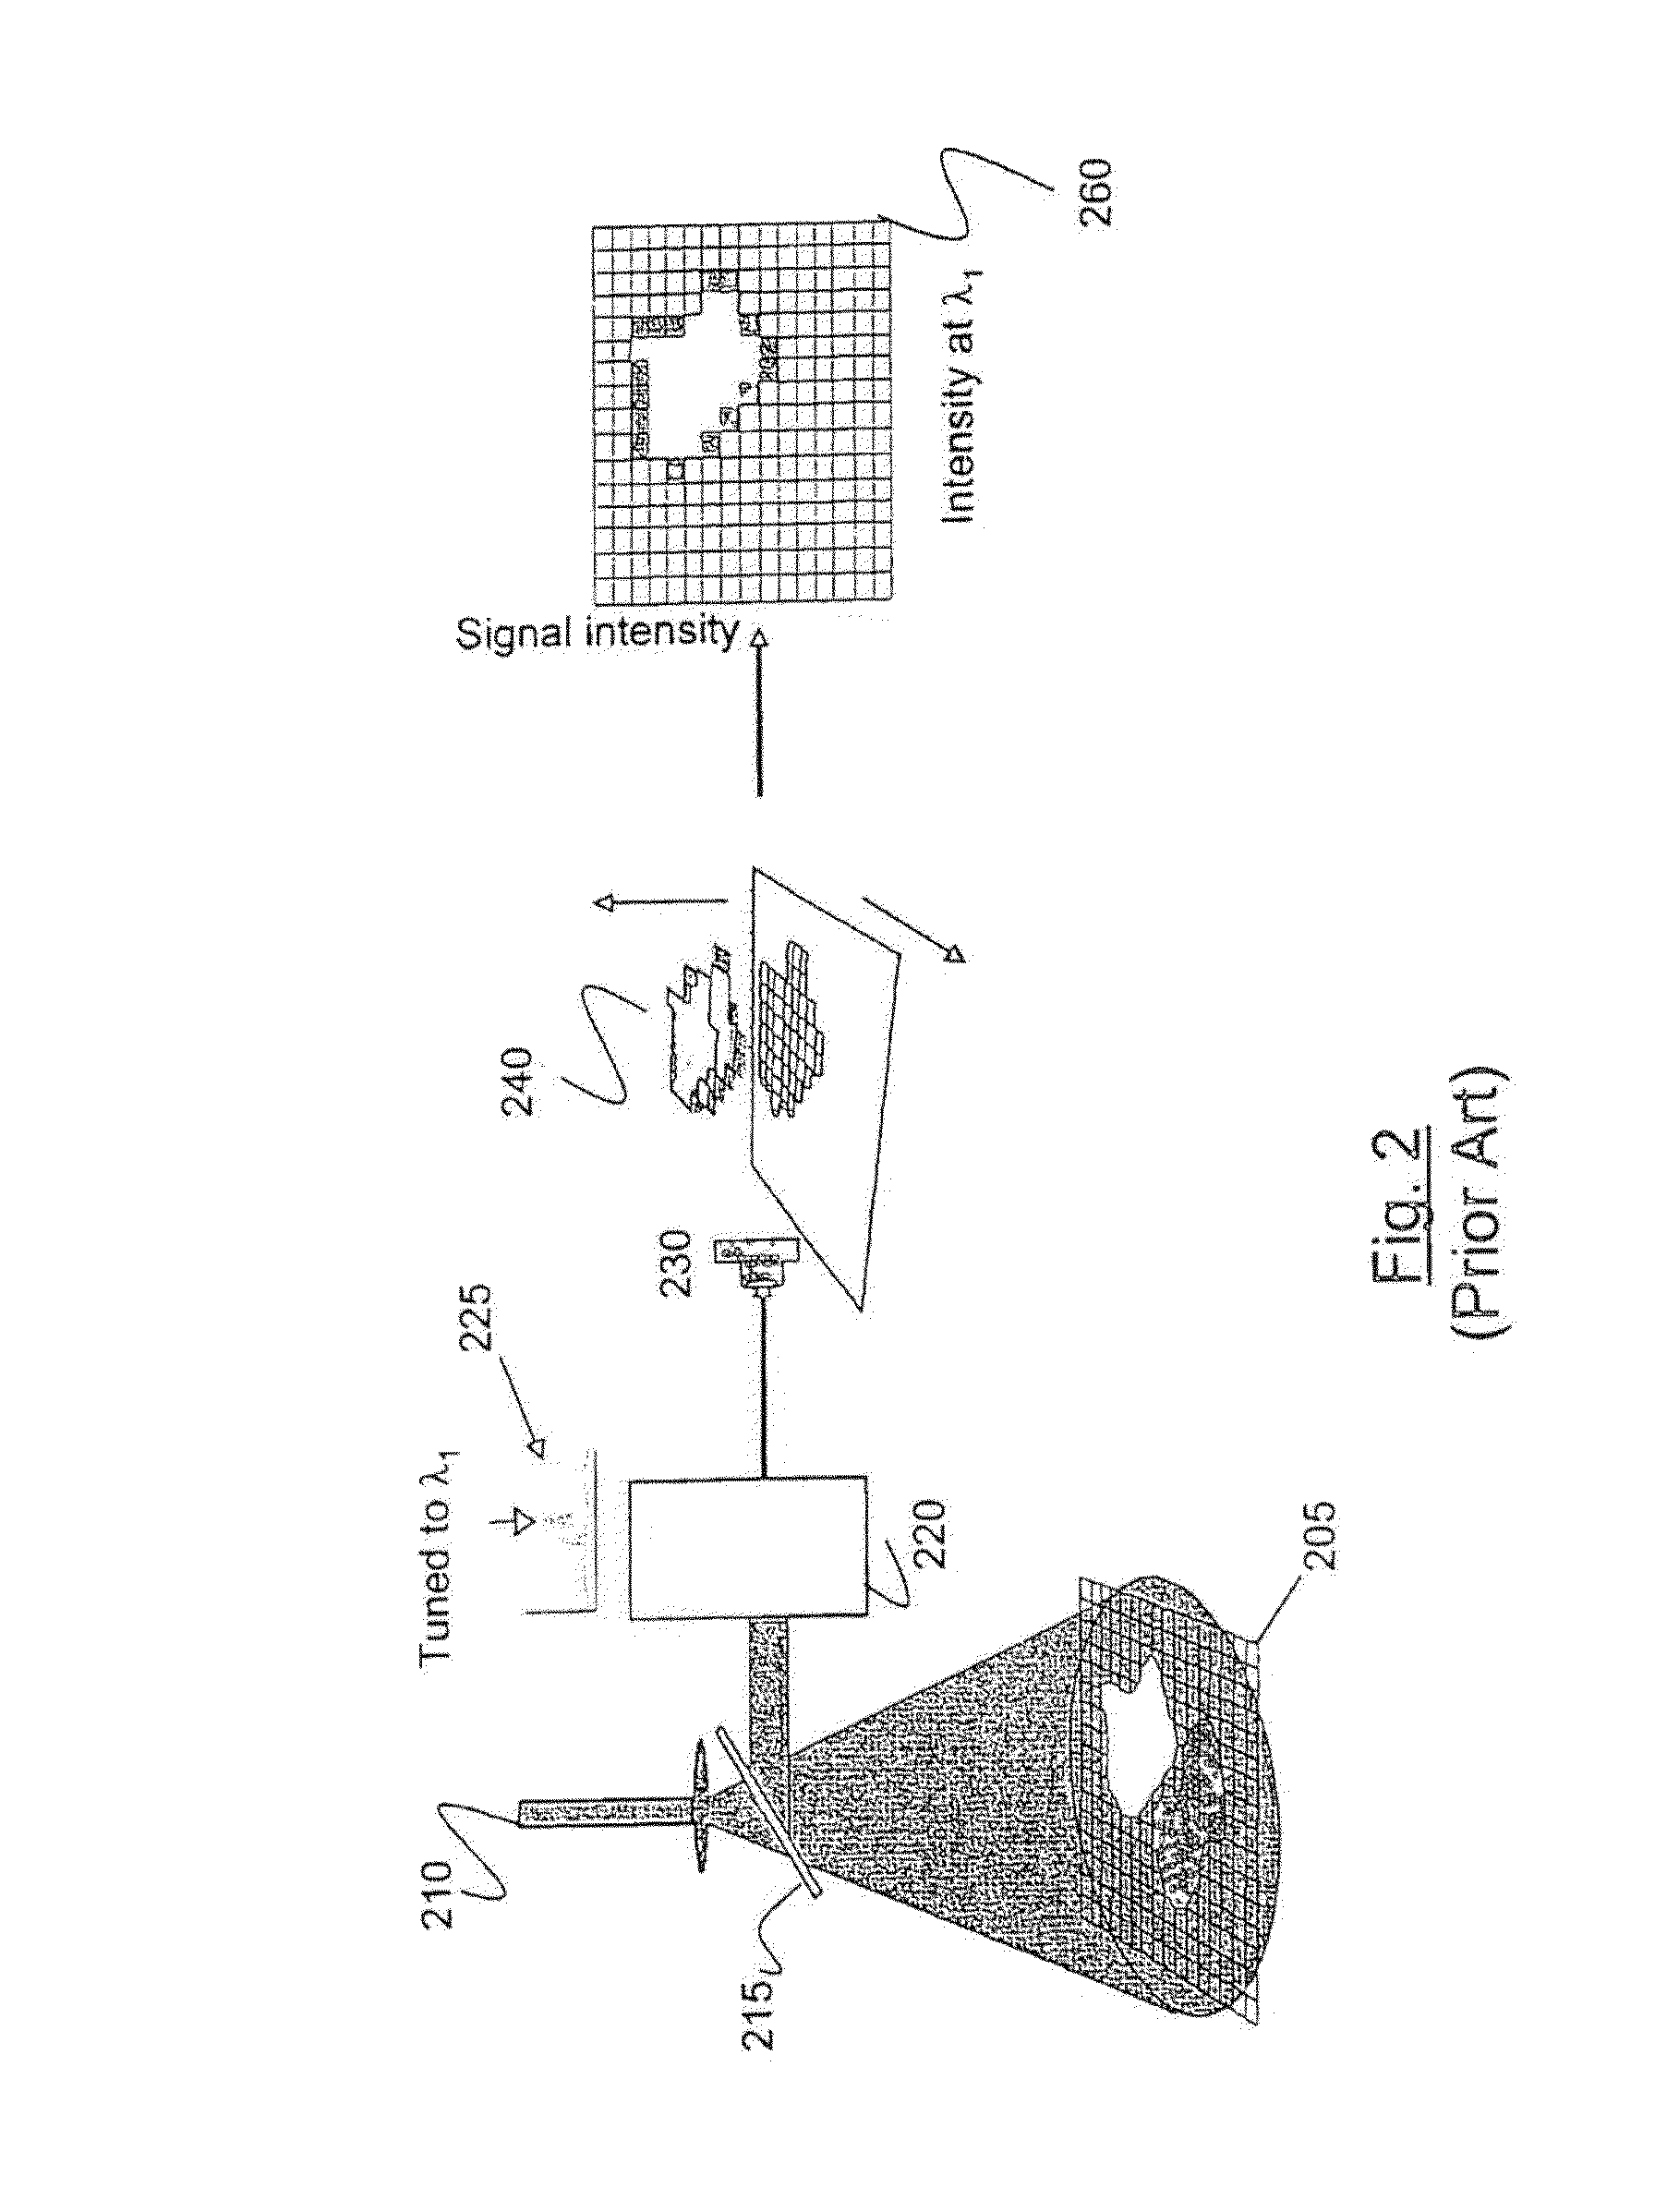 Method and apparatus for compact spectrometer for multipoint sampling of an object